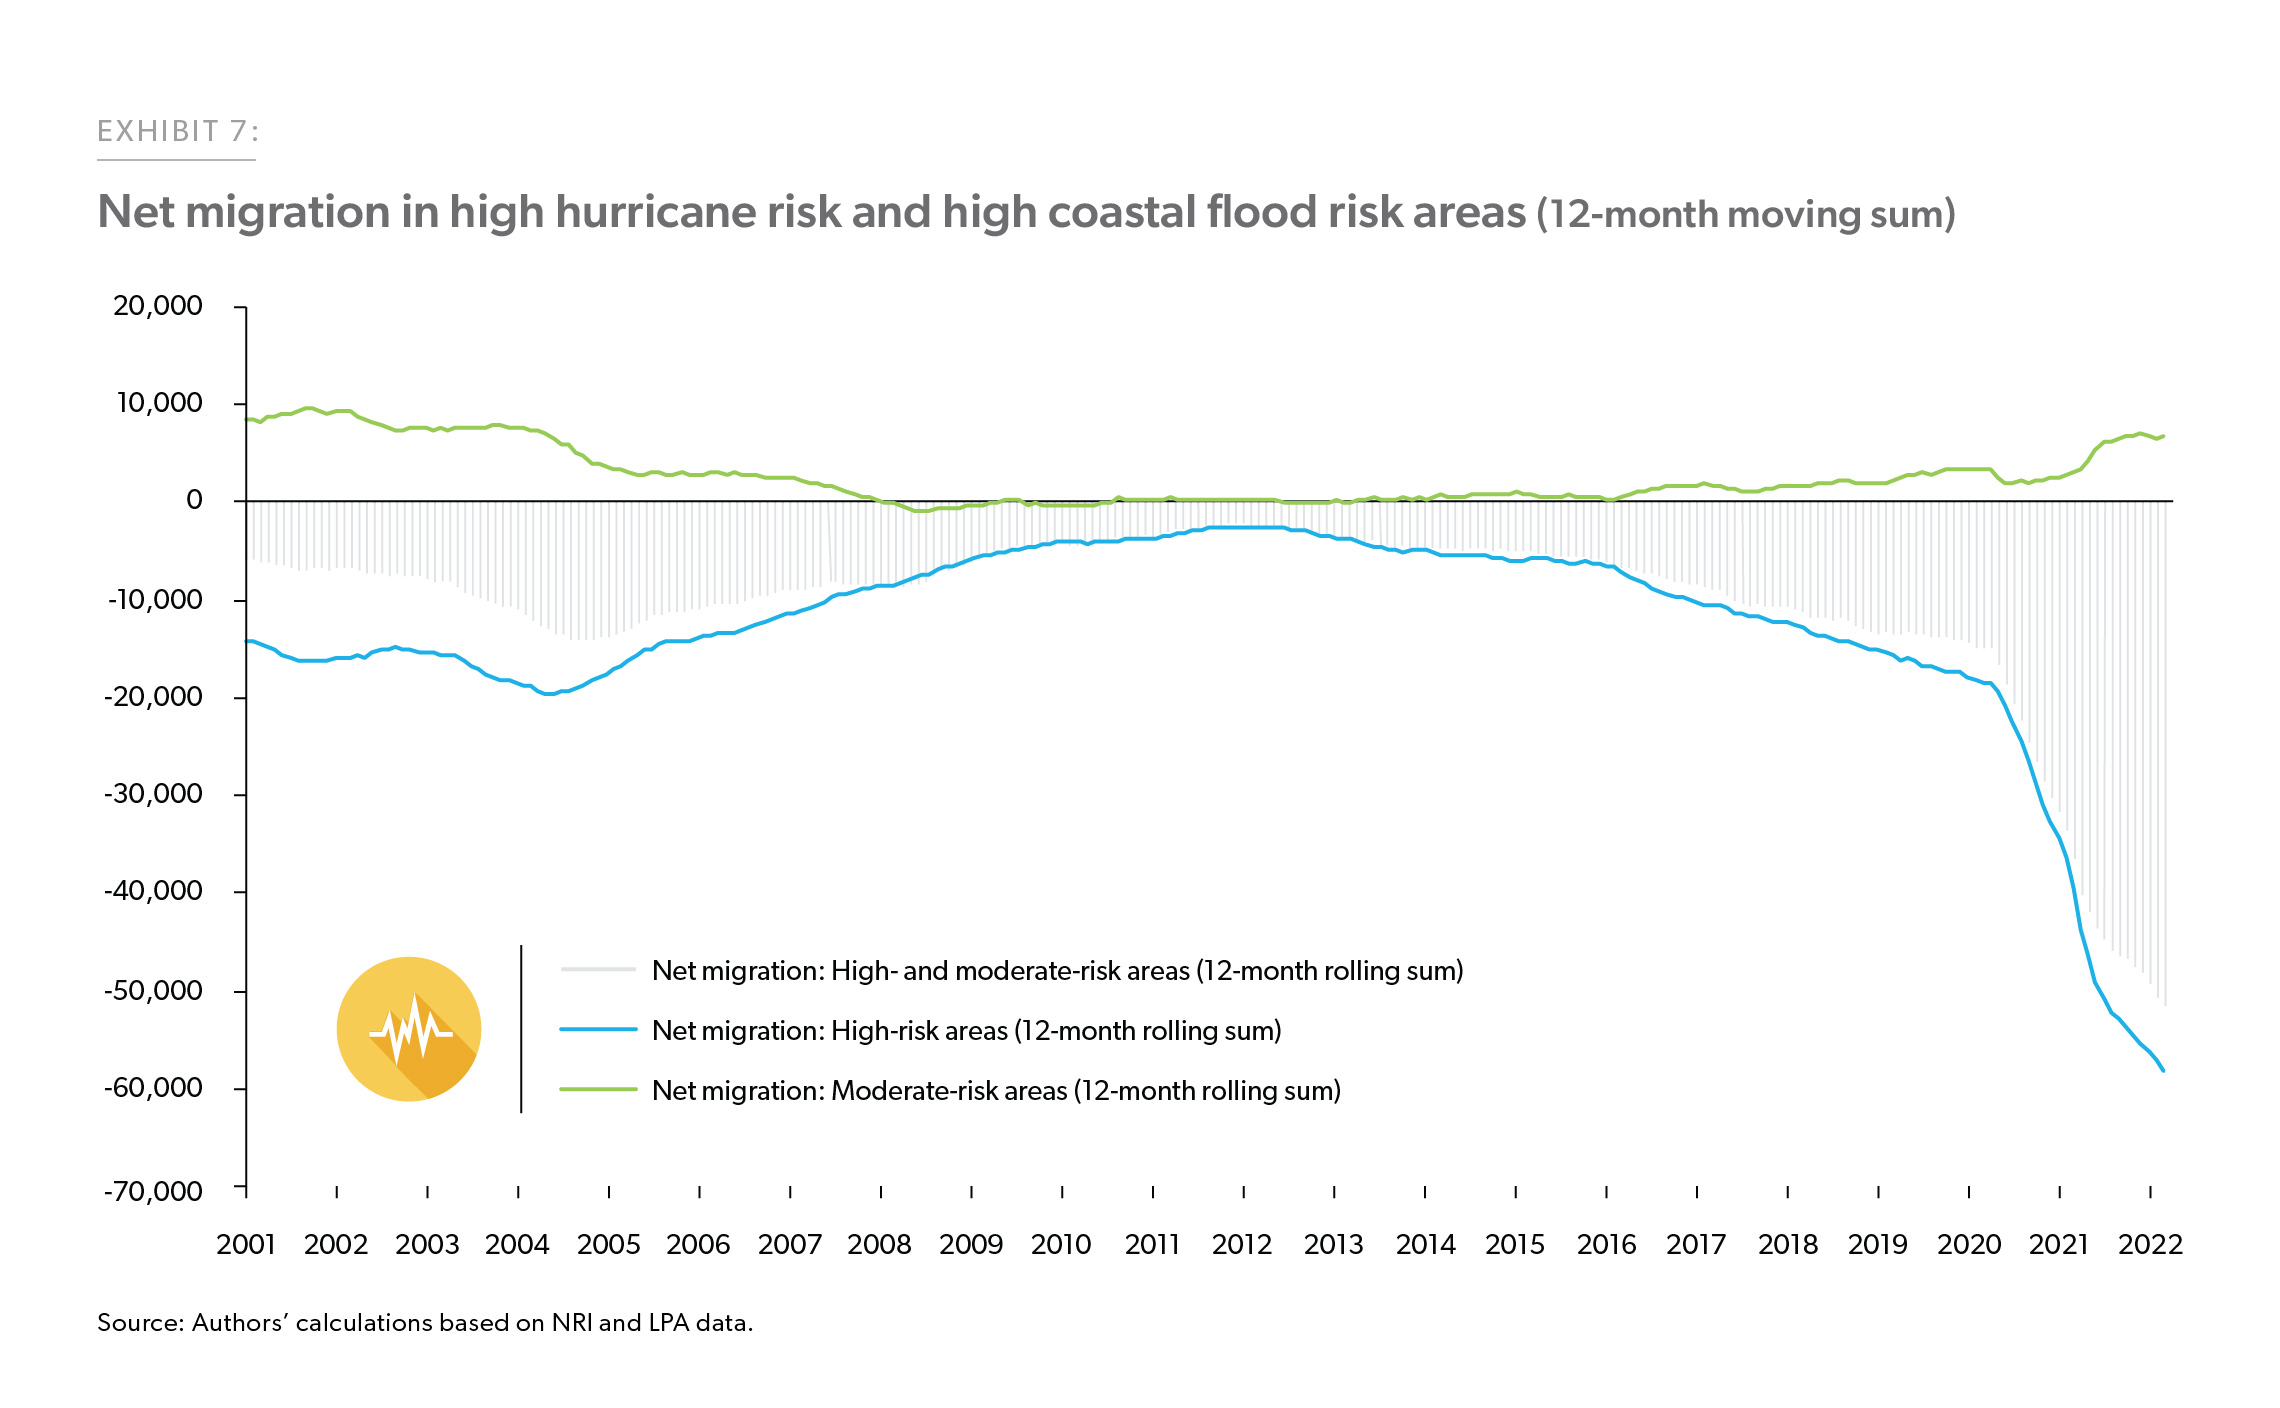 Net migration in high hurricane risk and high coastal flood risk areas (12-month moving sum)